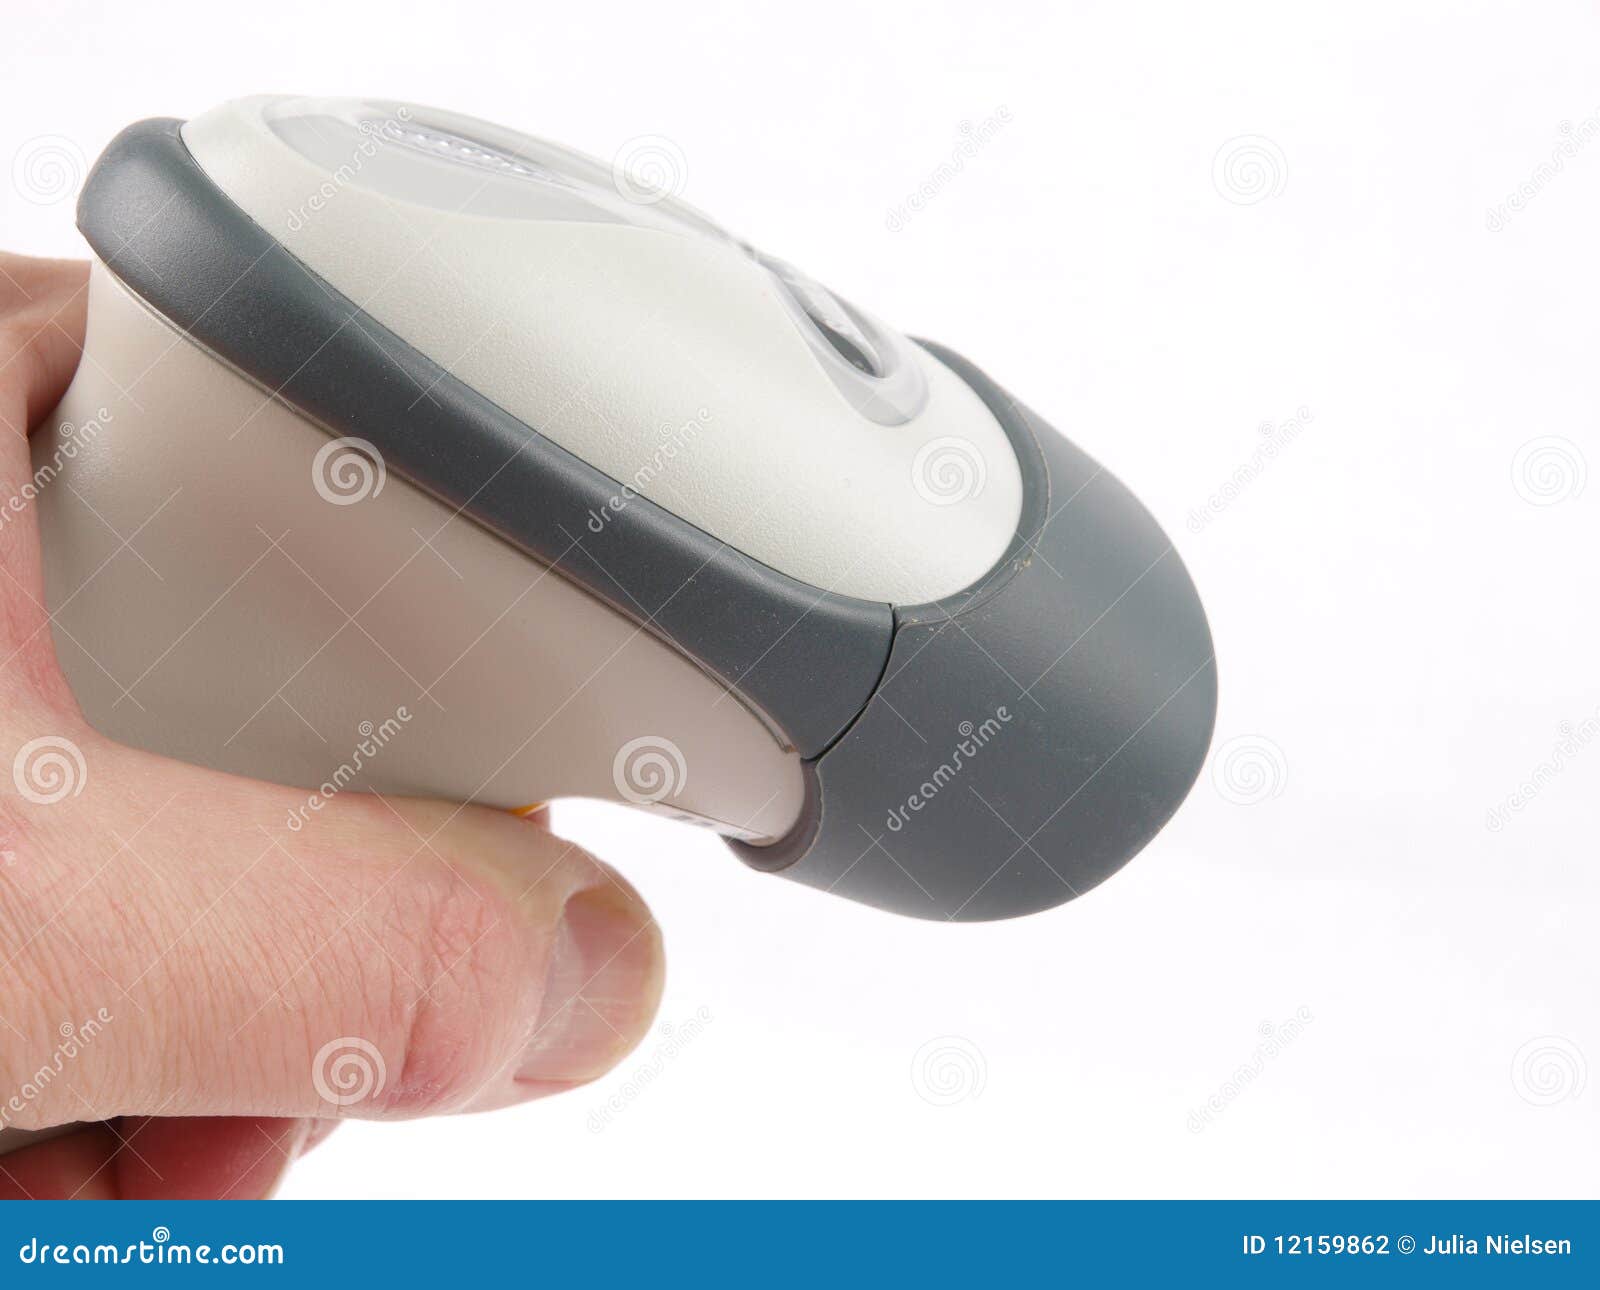 barcode scanner clipart - photo #48